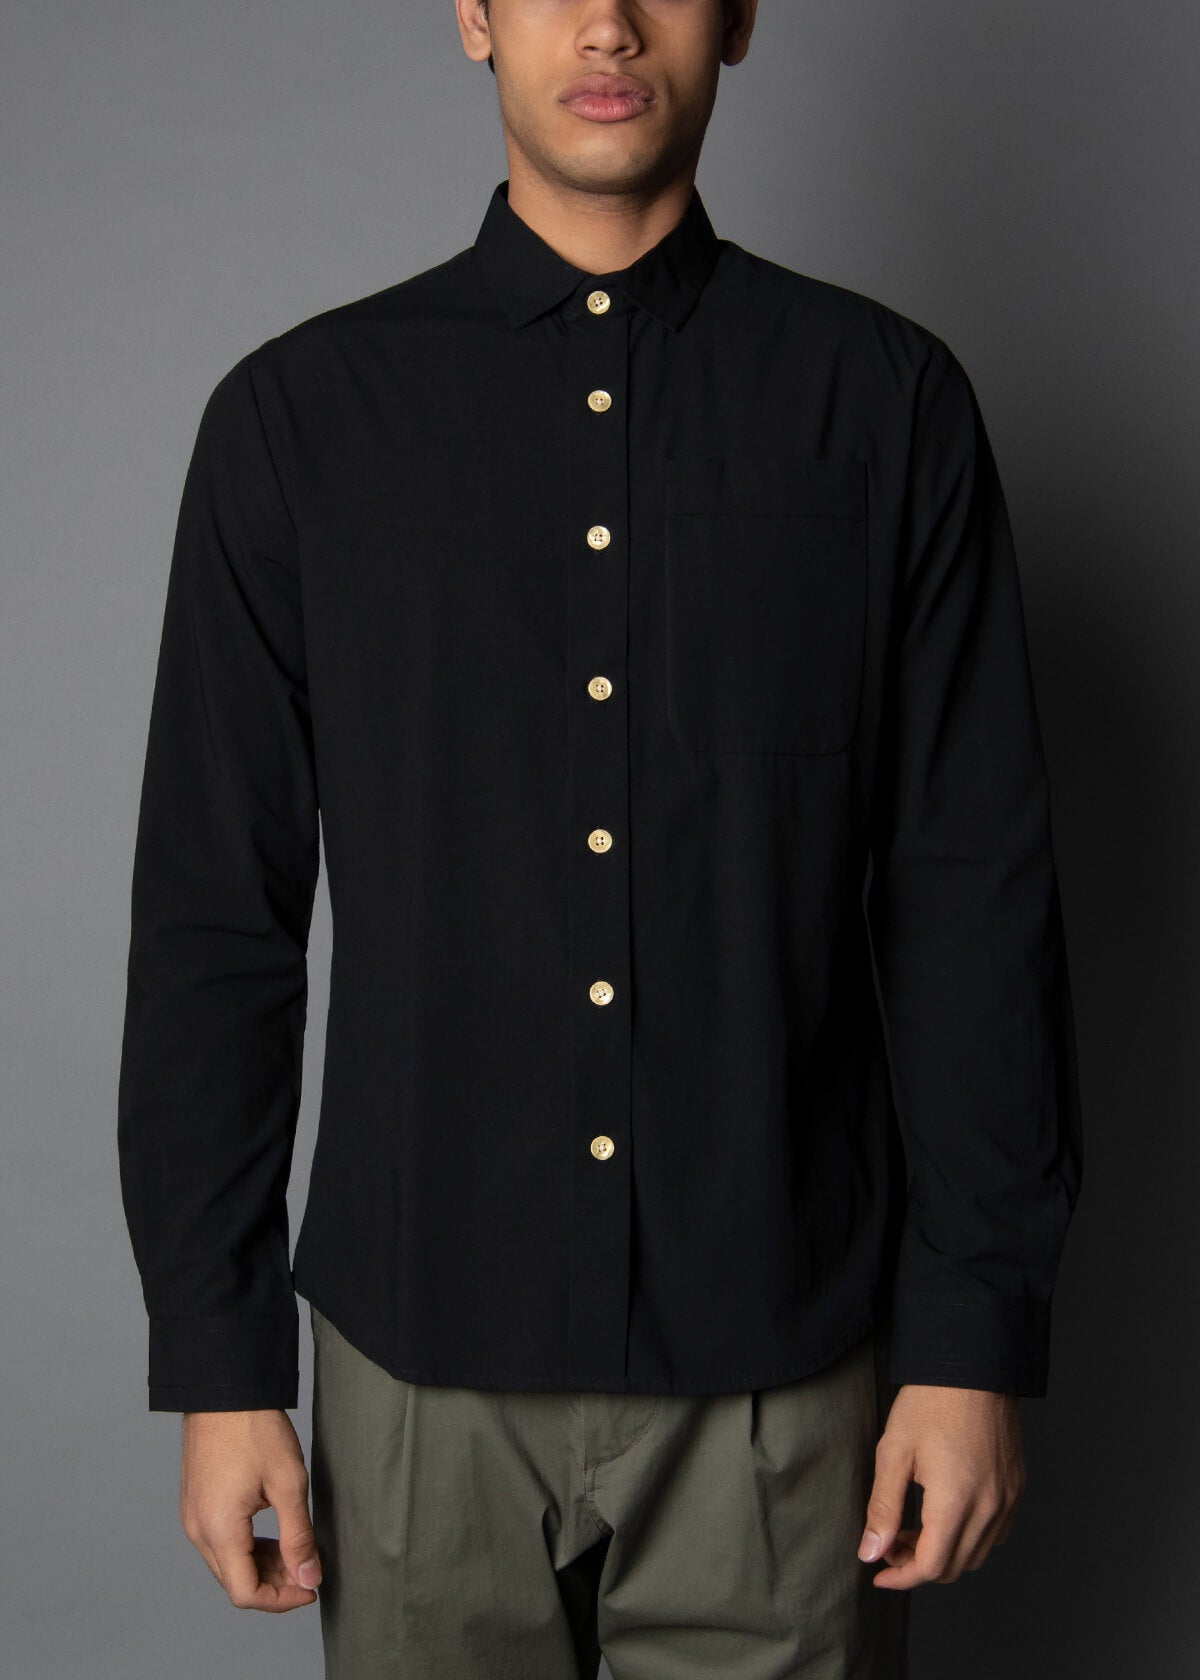 men's black shirt made from cotton and modal